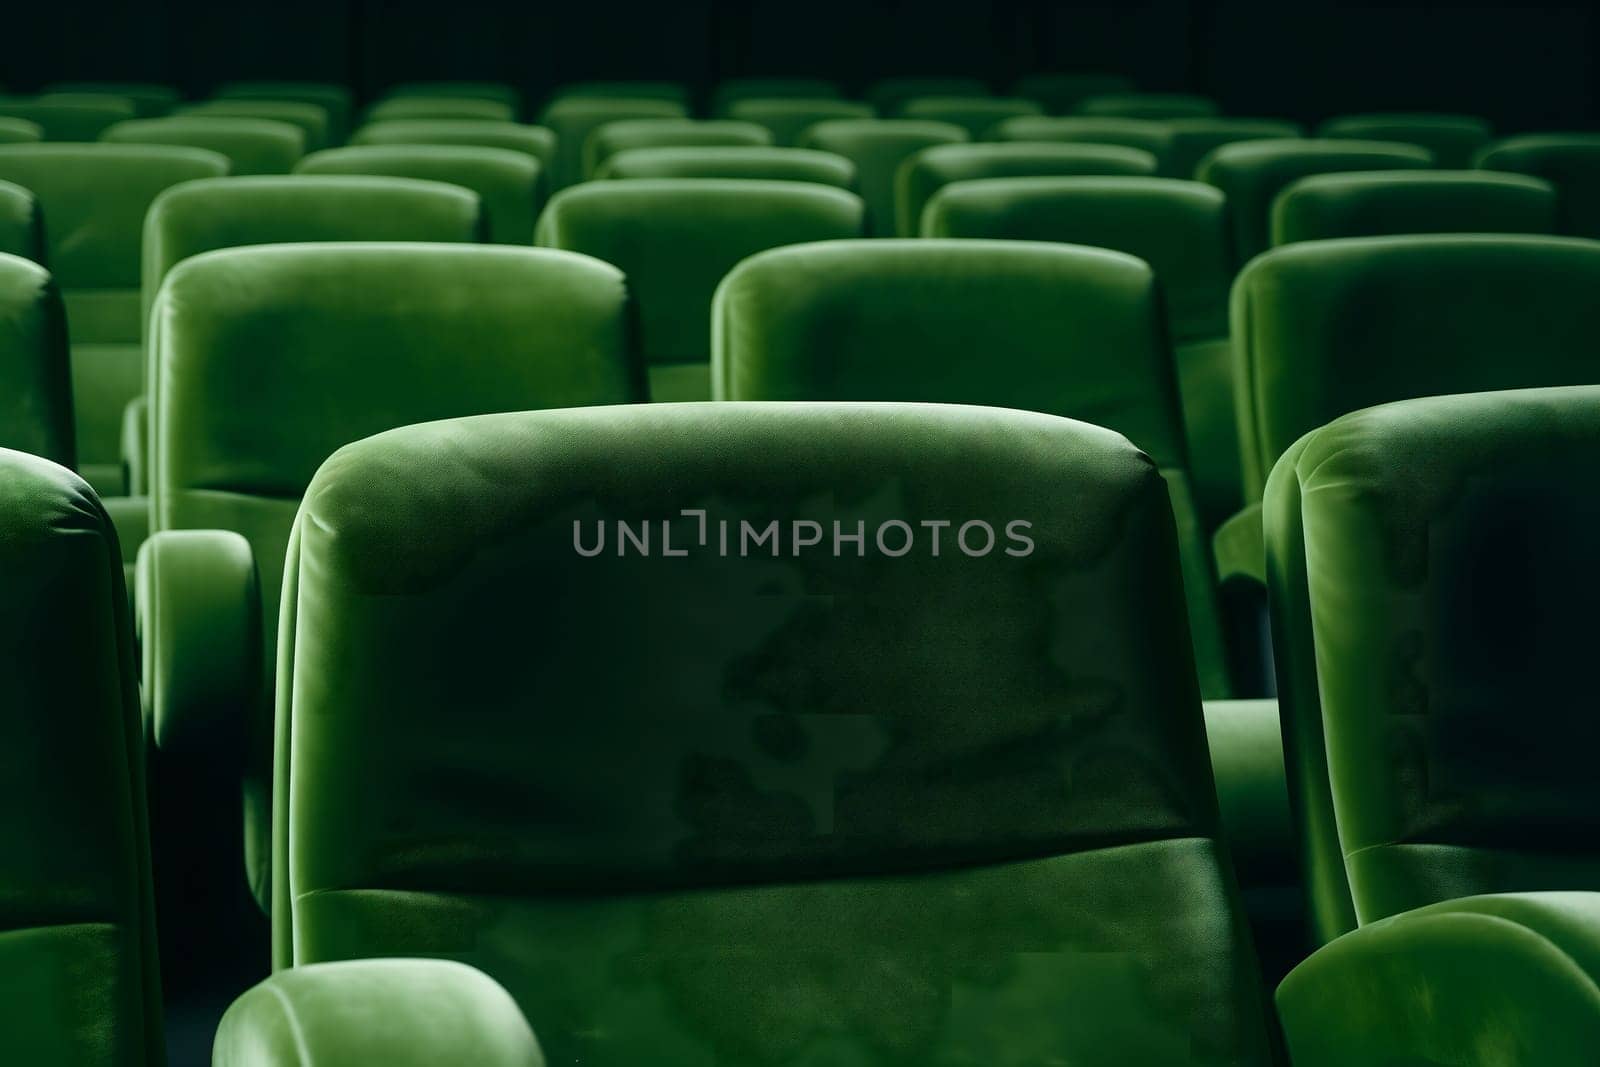 empty green seats in cinema, domestic intimacy, zoom in, up close by z1b